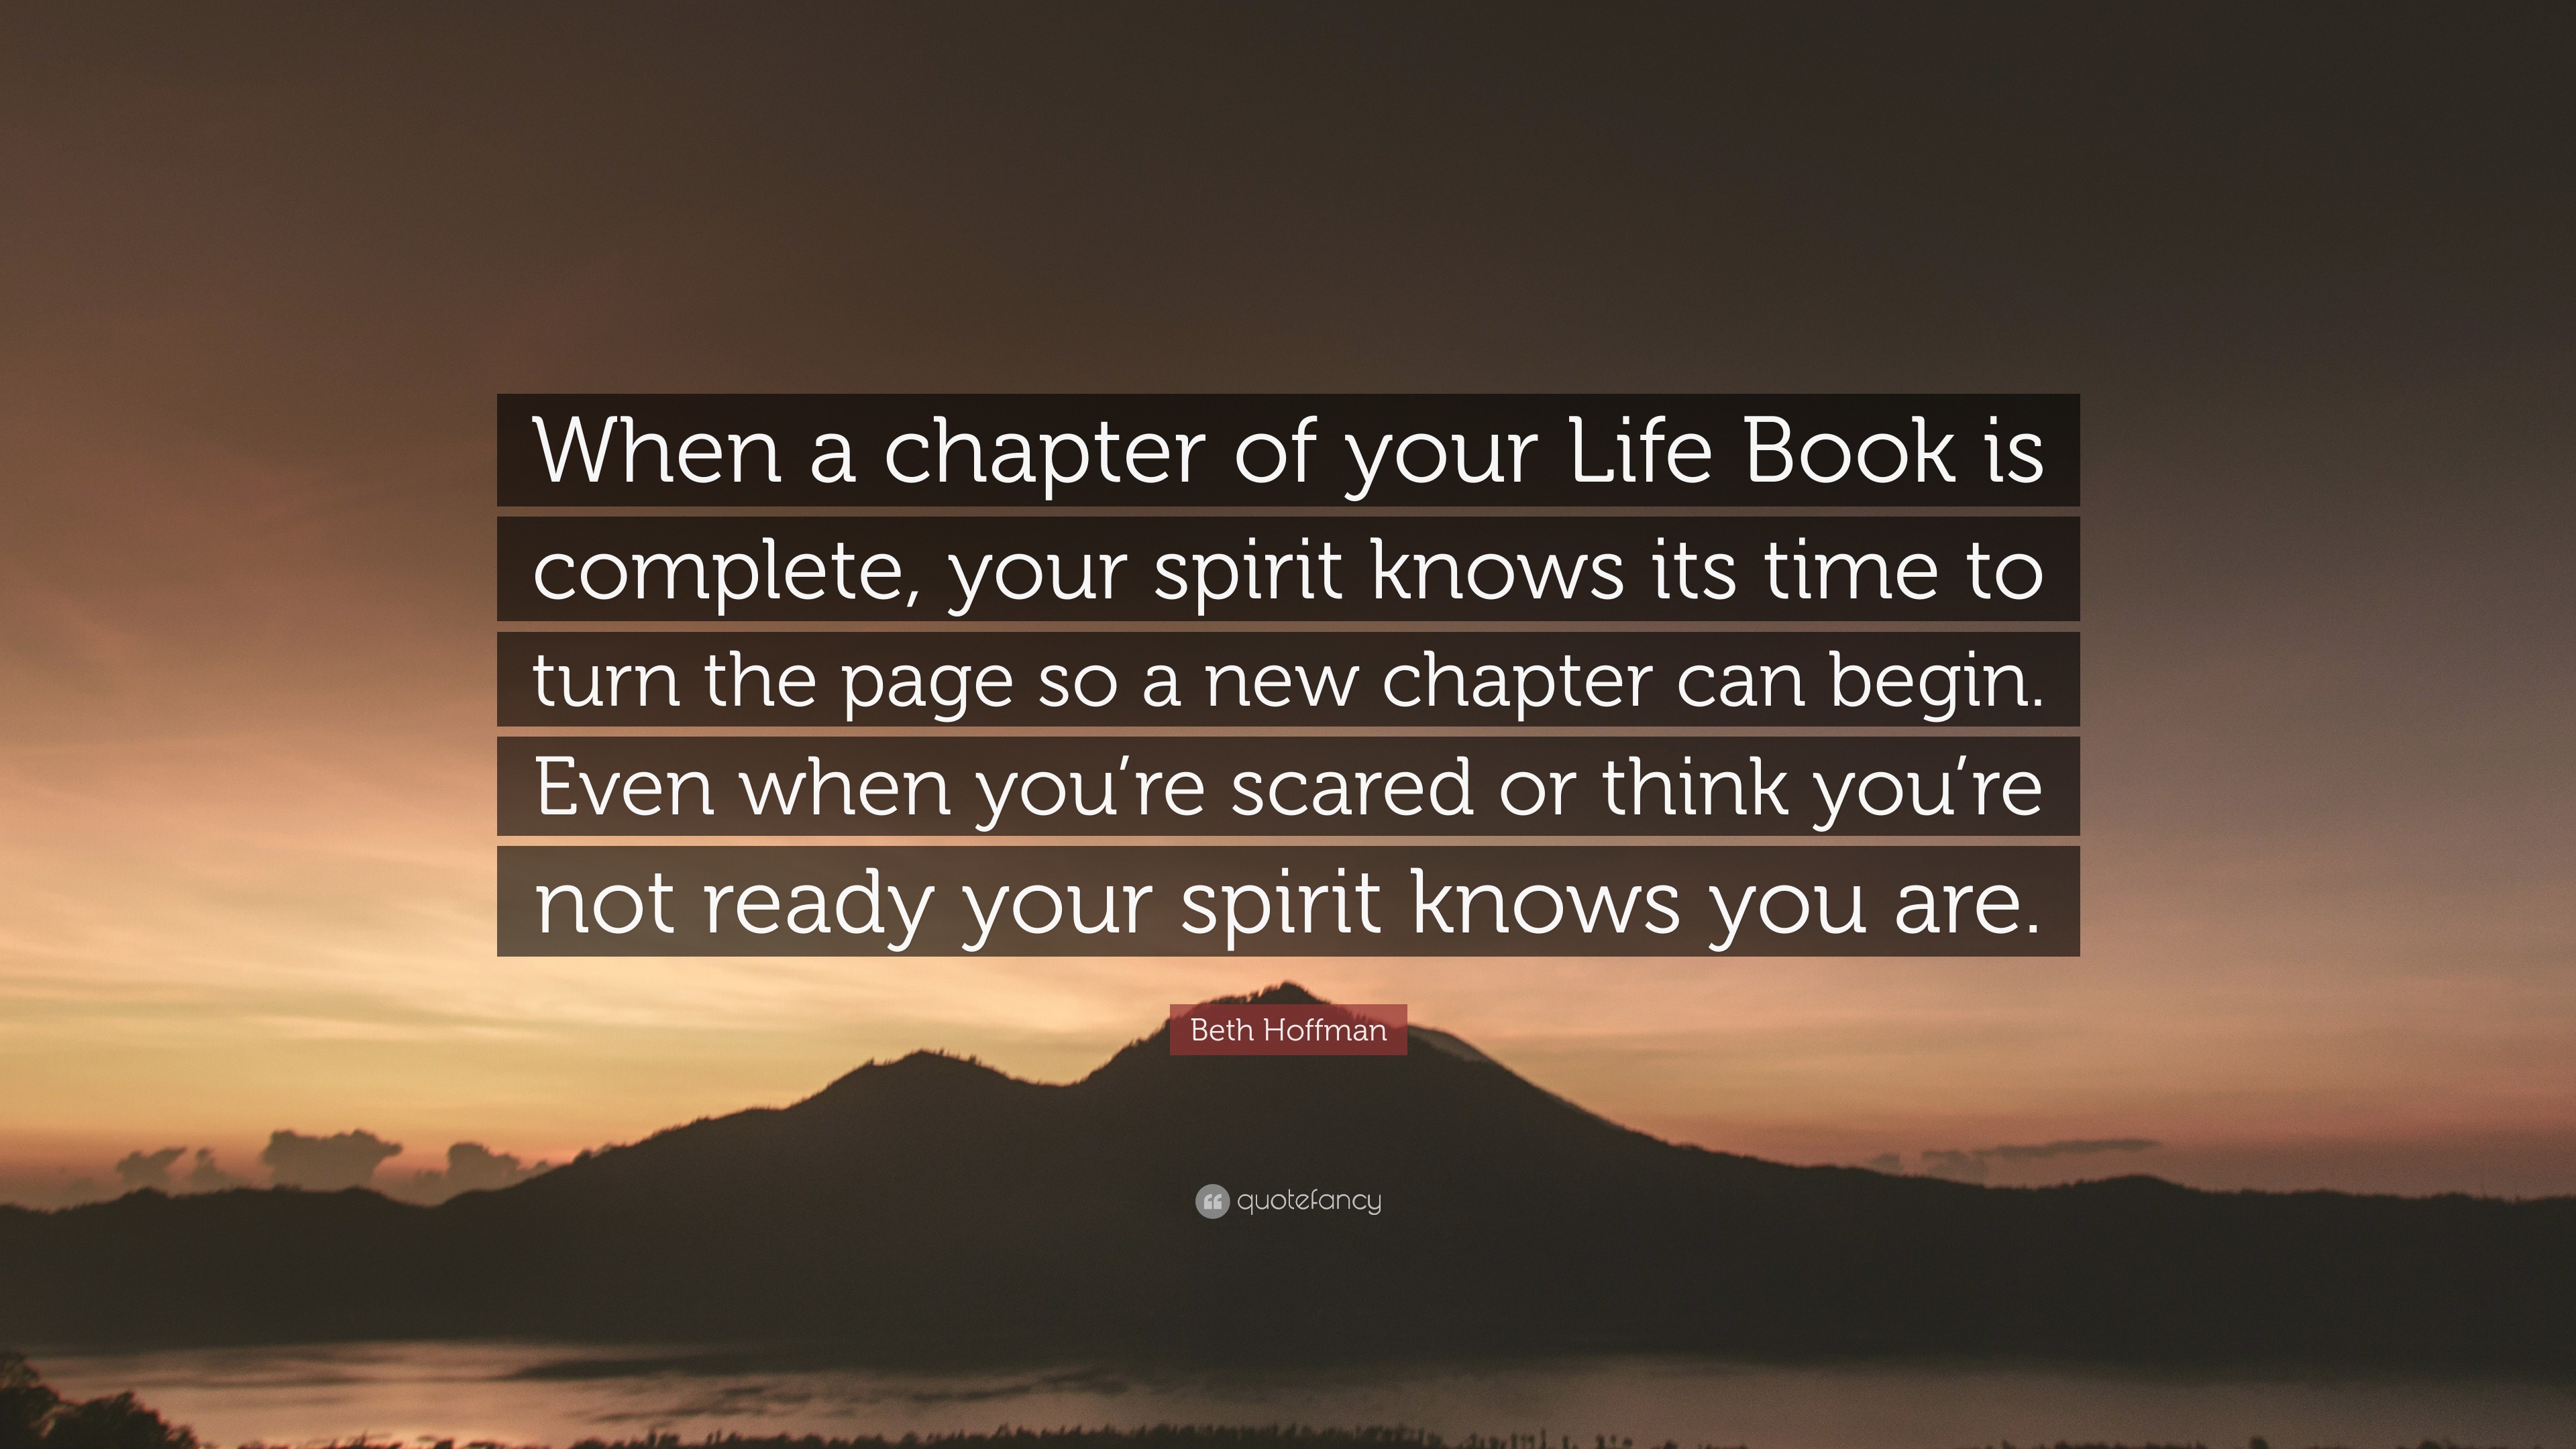 Beth Hoffman Quote: "When a chapter of your Life Book is ...